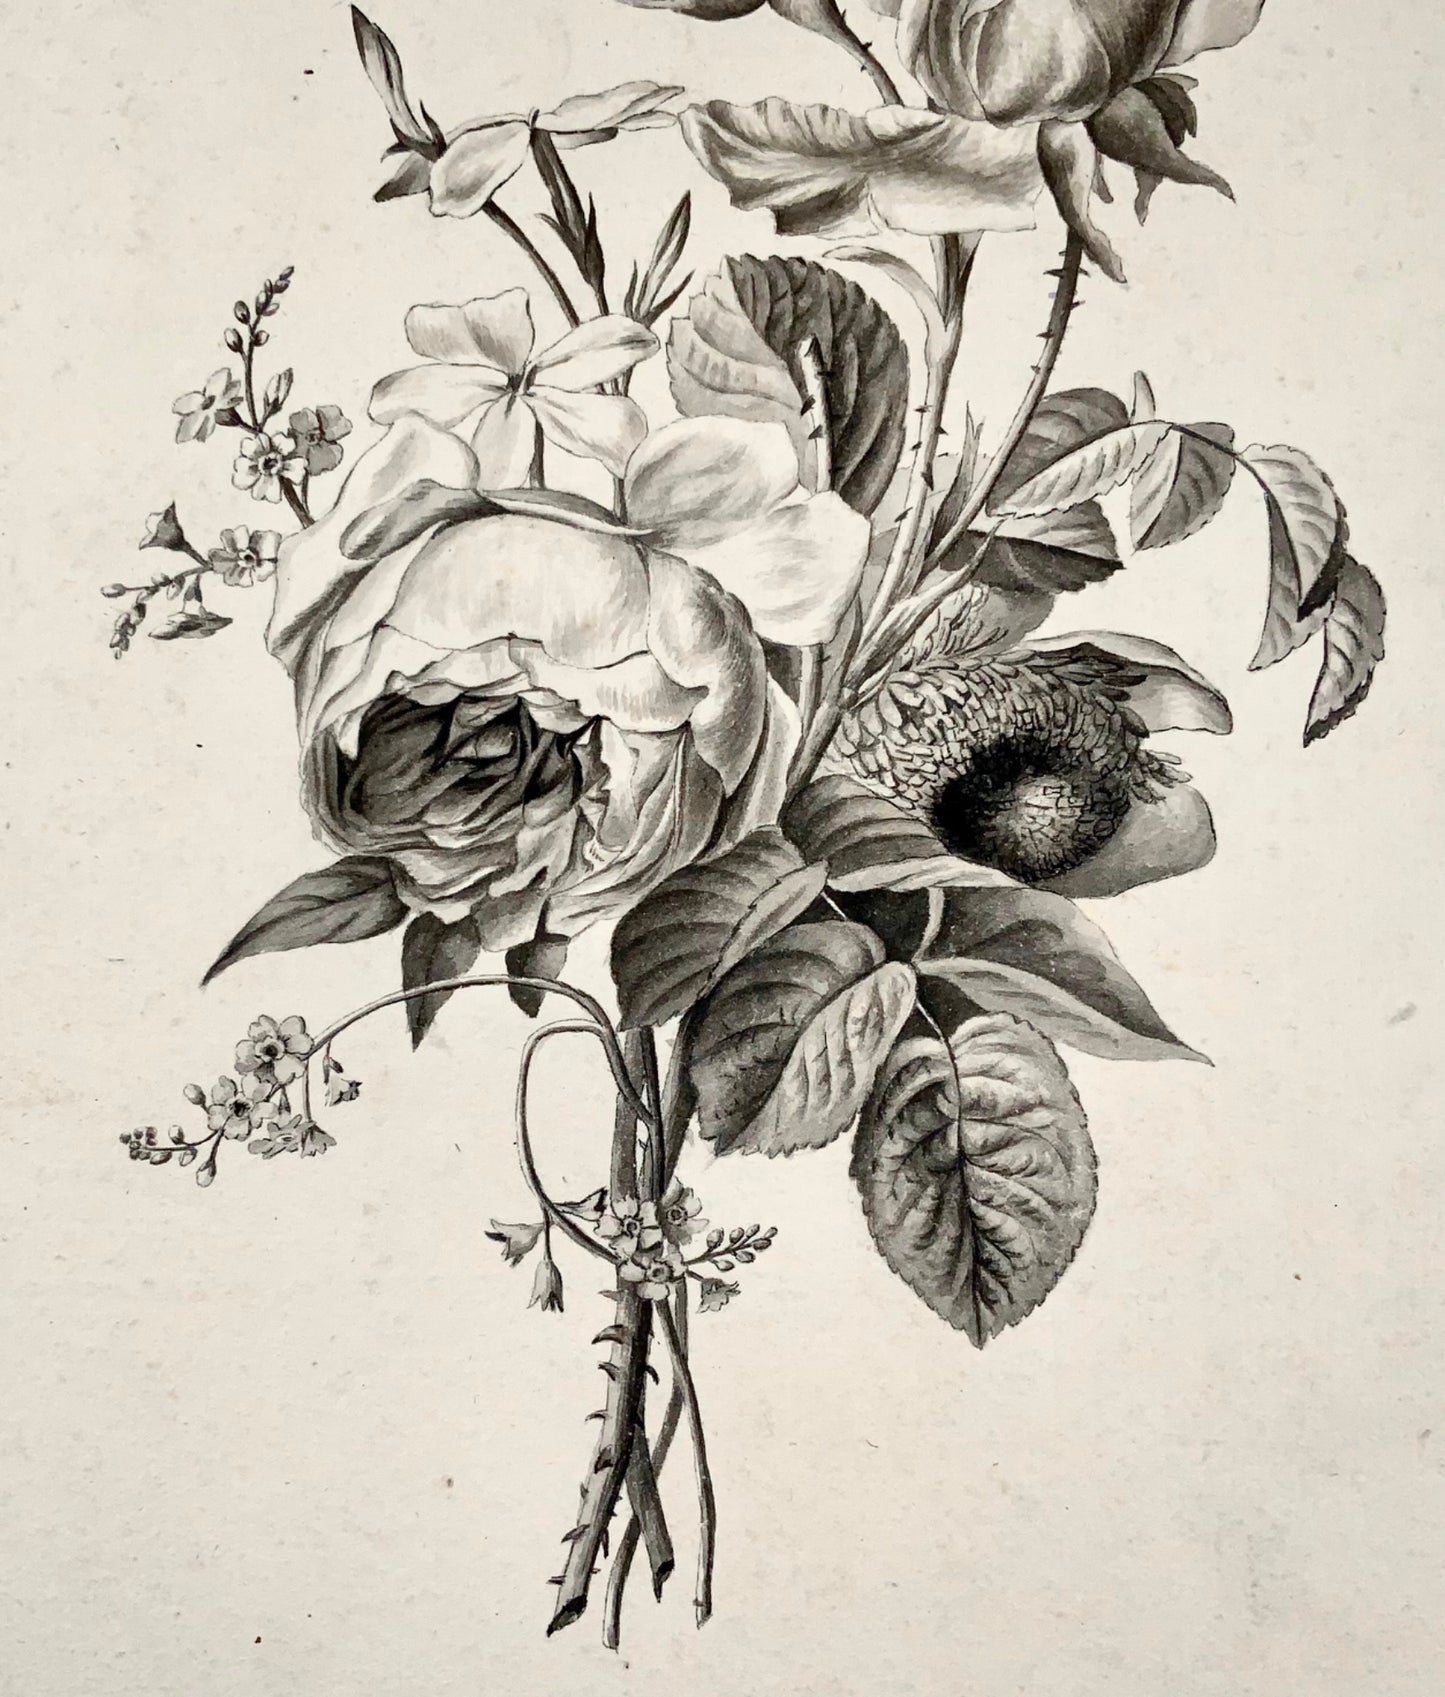 Jean-Baptist Huet, the younger [(1772-1852) attrib.], Bouquet Flowers pen & wash, flowers and botany